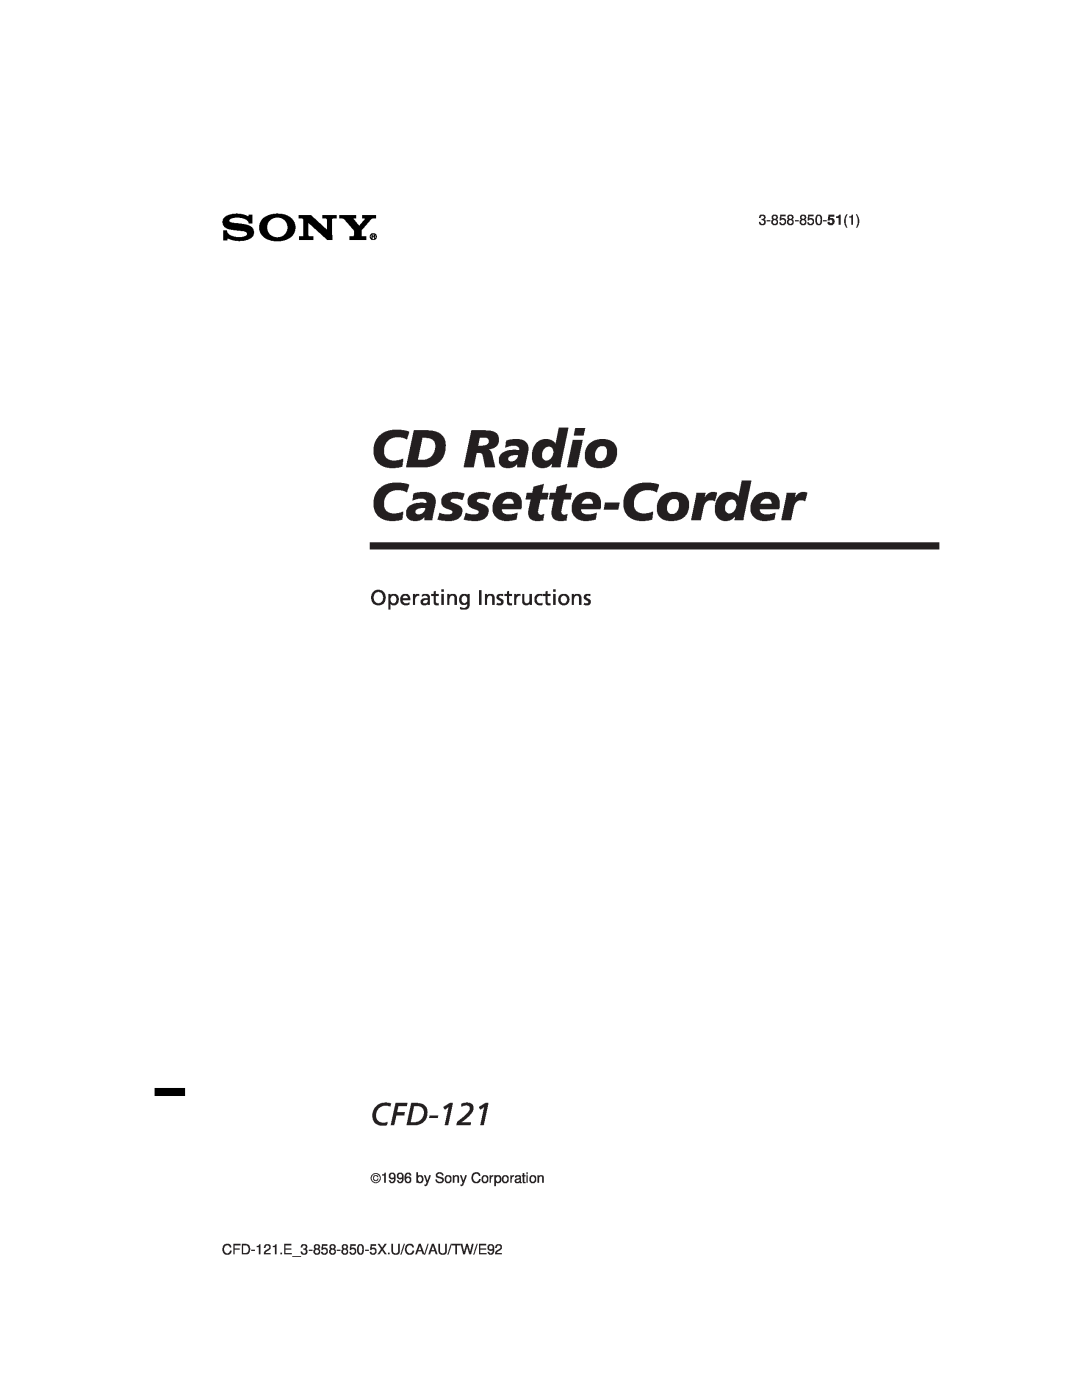 Sony CFD-121 manual CD Radio Cassette-Corder, Operating Instructions, 3-858-850-511, ã1996 by Sony Corporation 